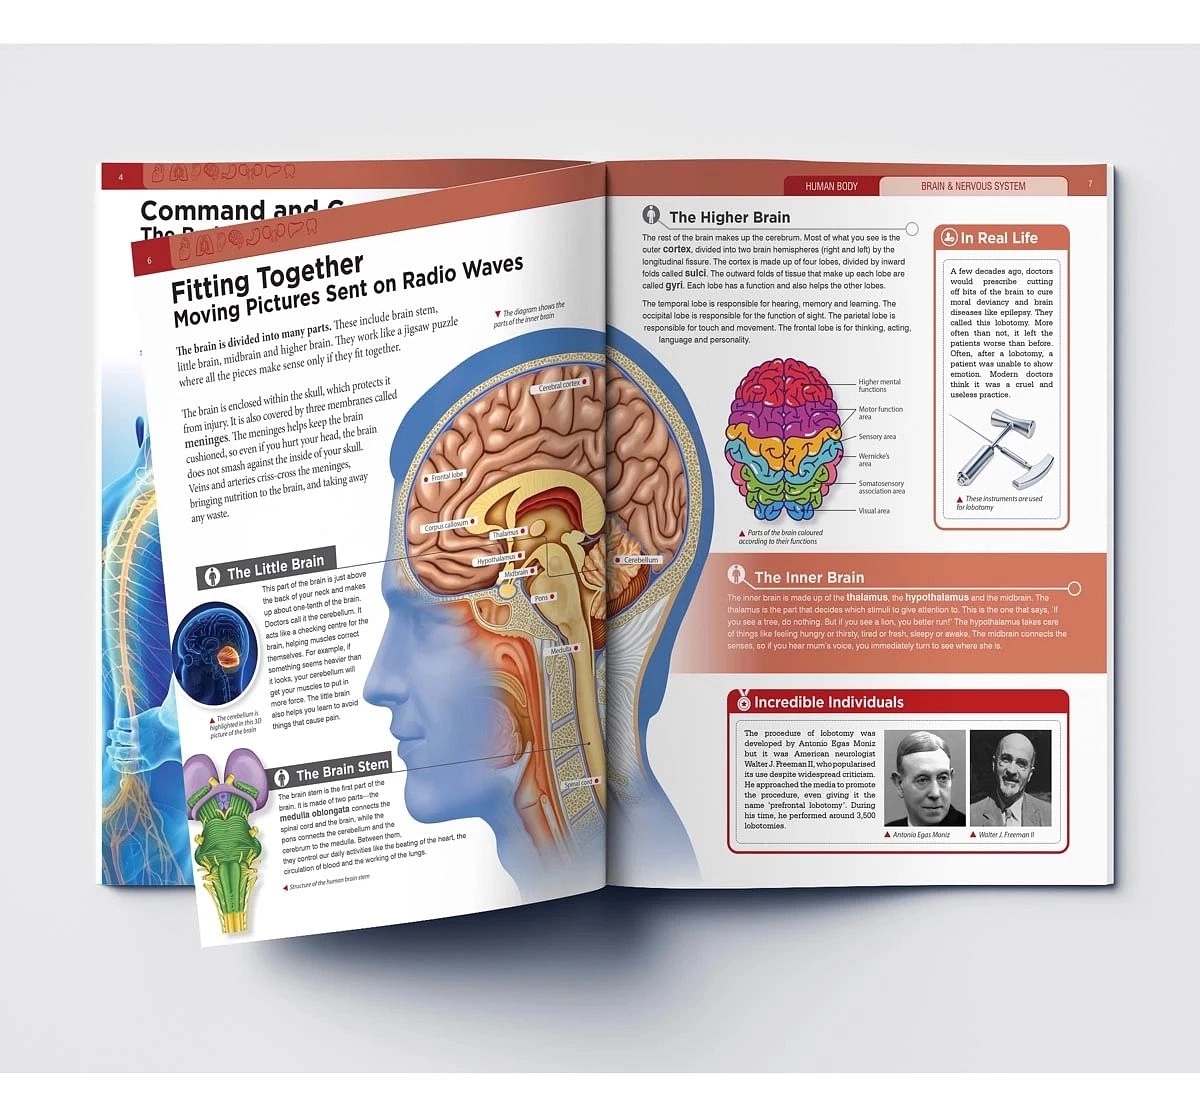 Wonder House Books Human Body Brain and Nervous System Knowledge Encyclopedia Book for kids 12Y+, Multicolour